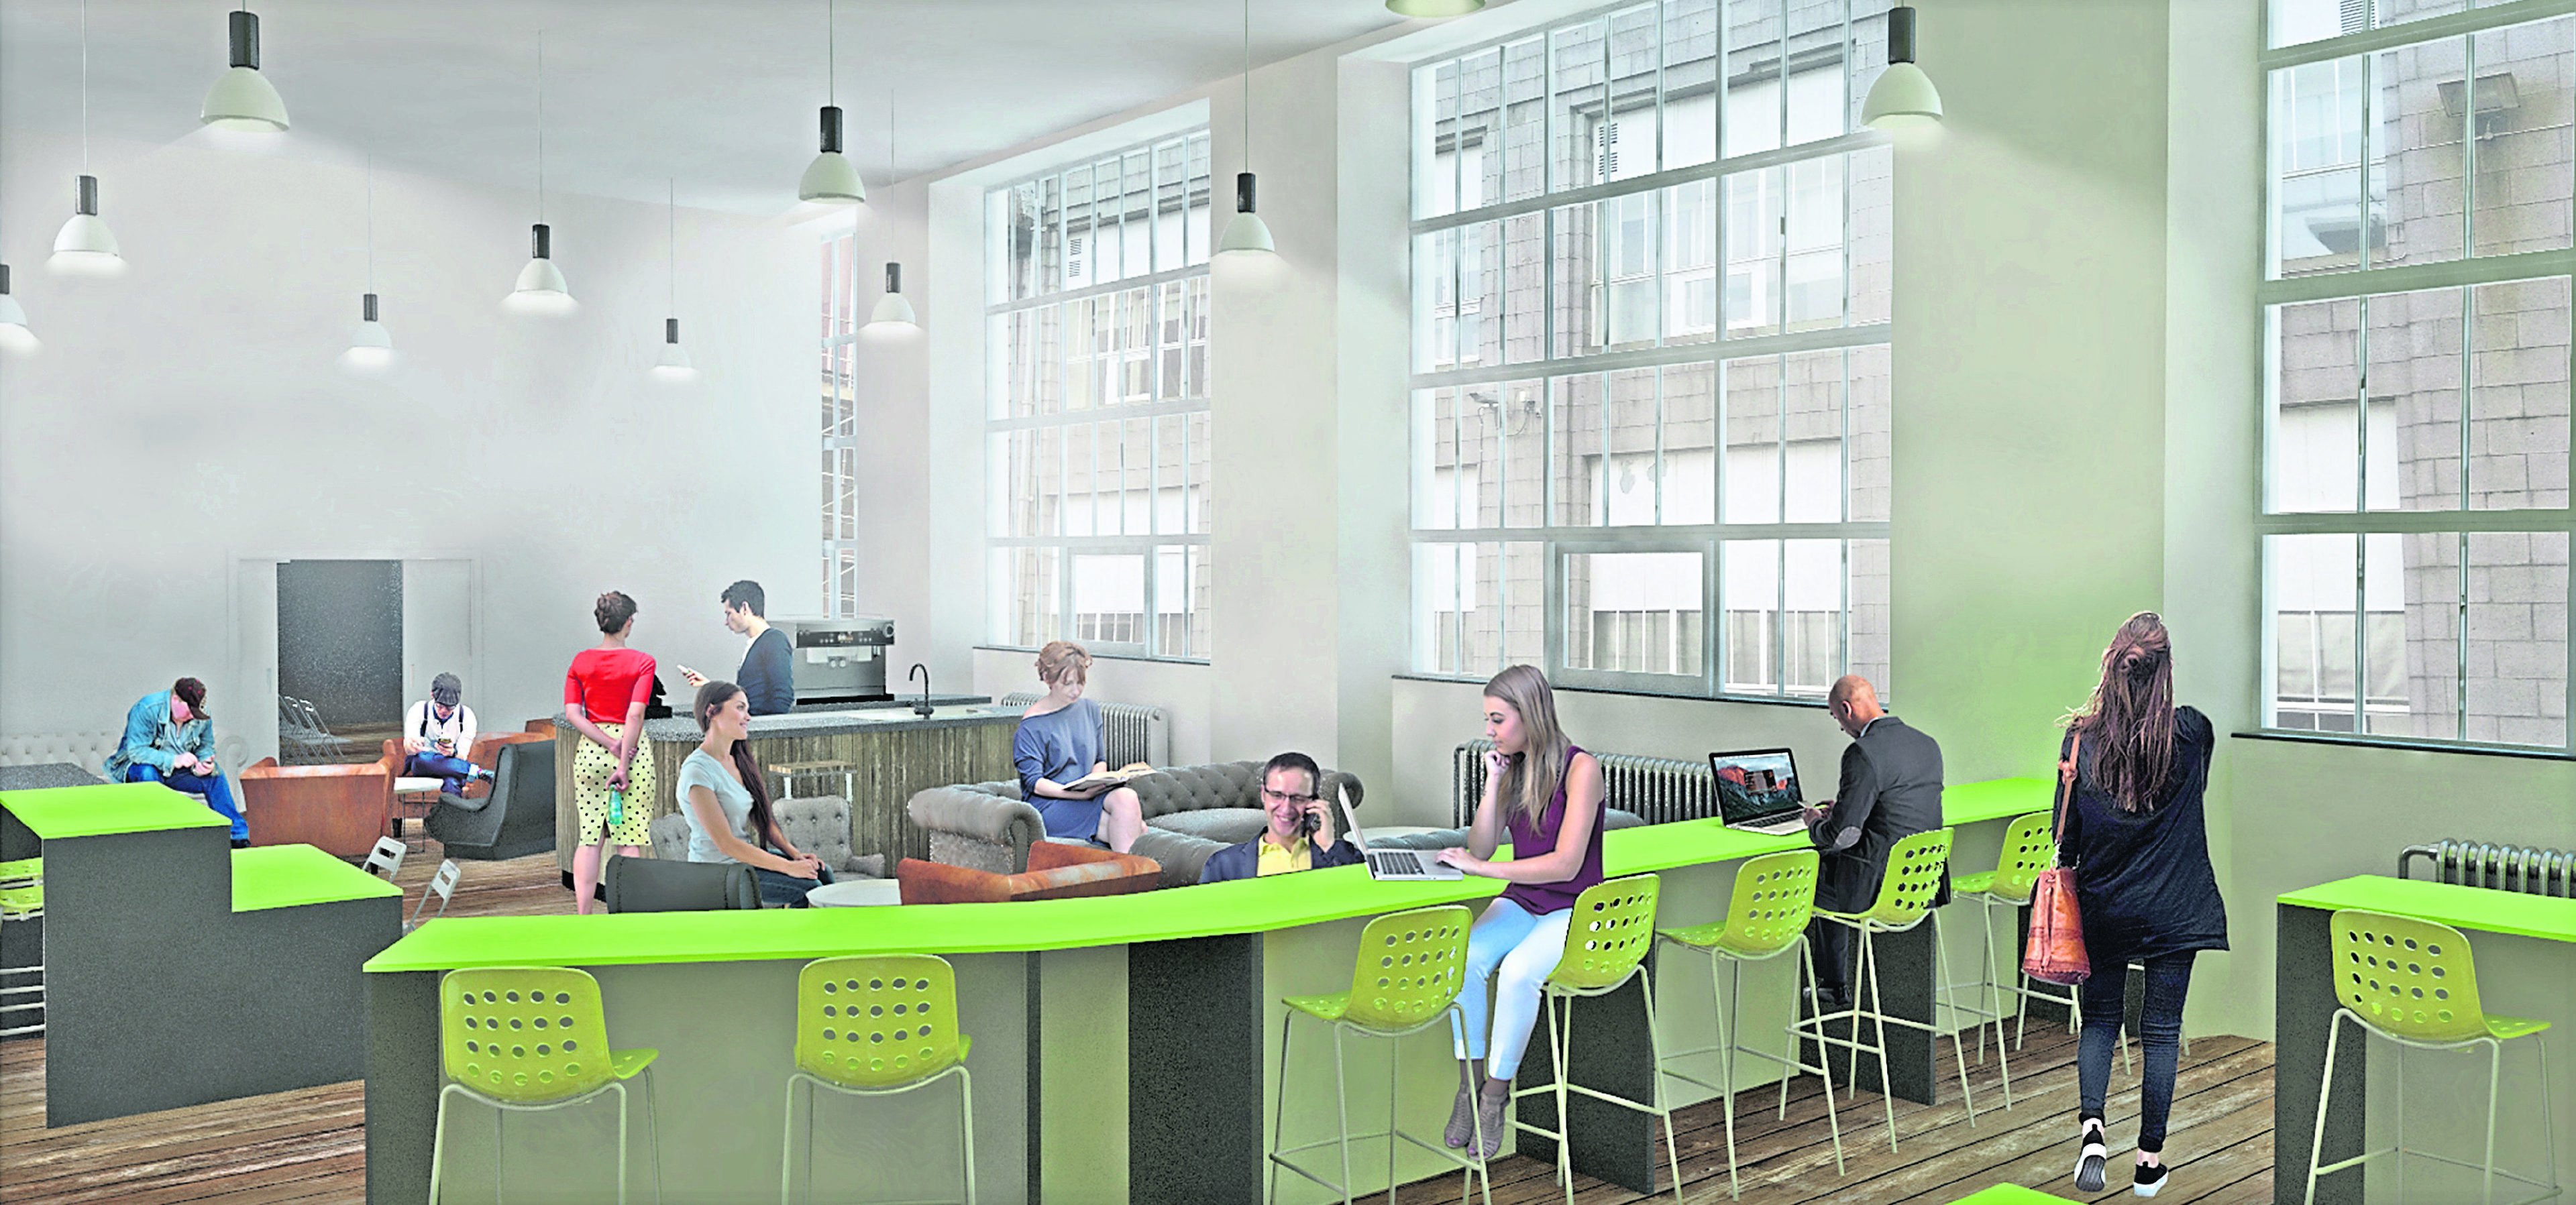 An artist’s impression of the One Digital and Entrepreneurship Hub in the old RGU administration building.